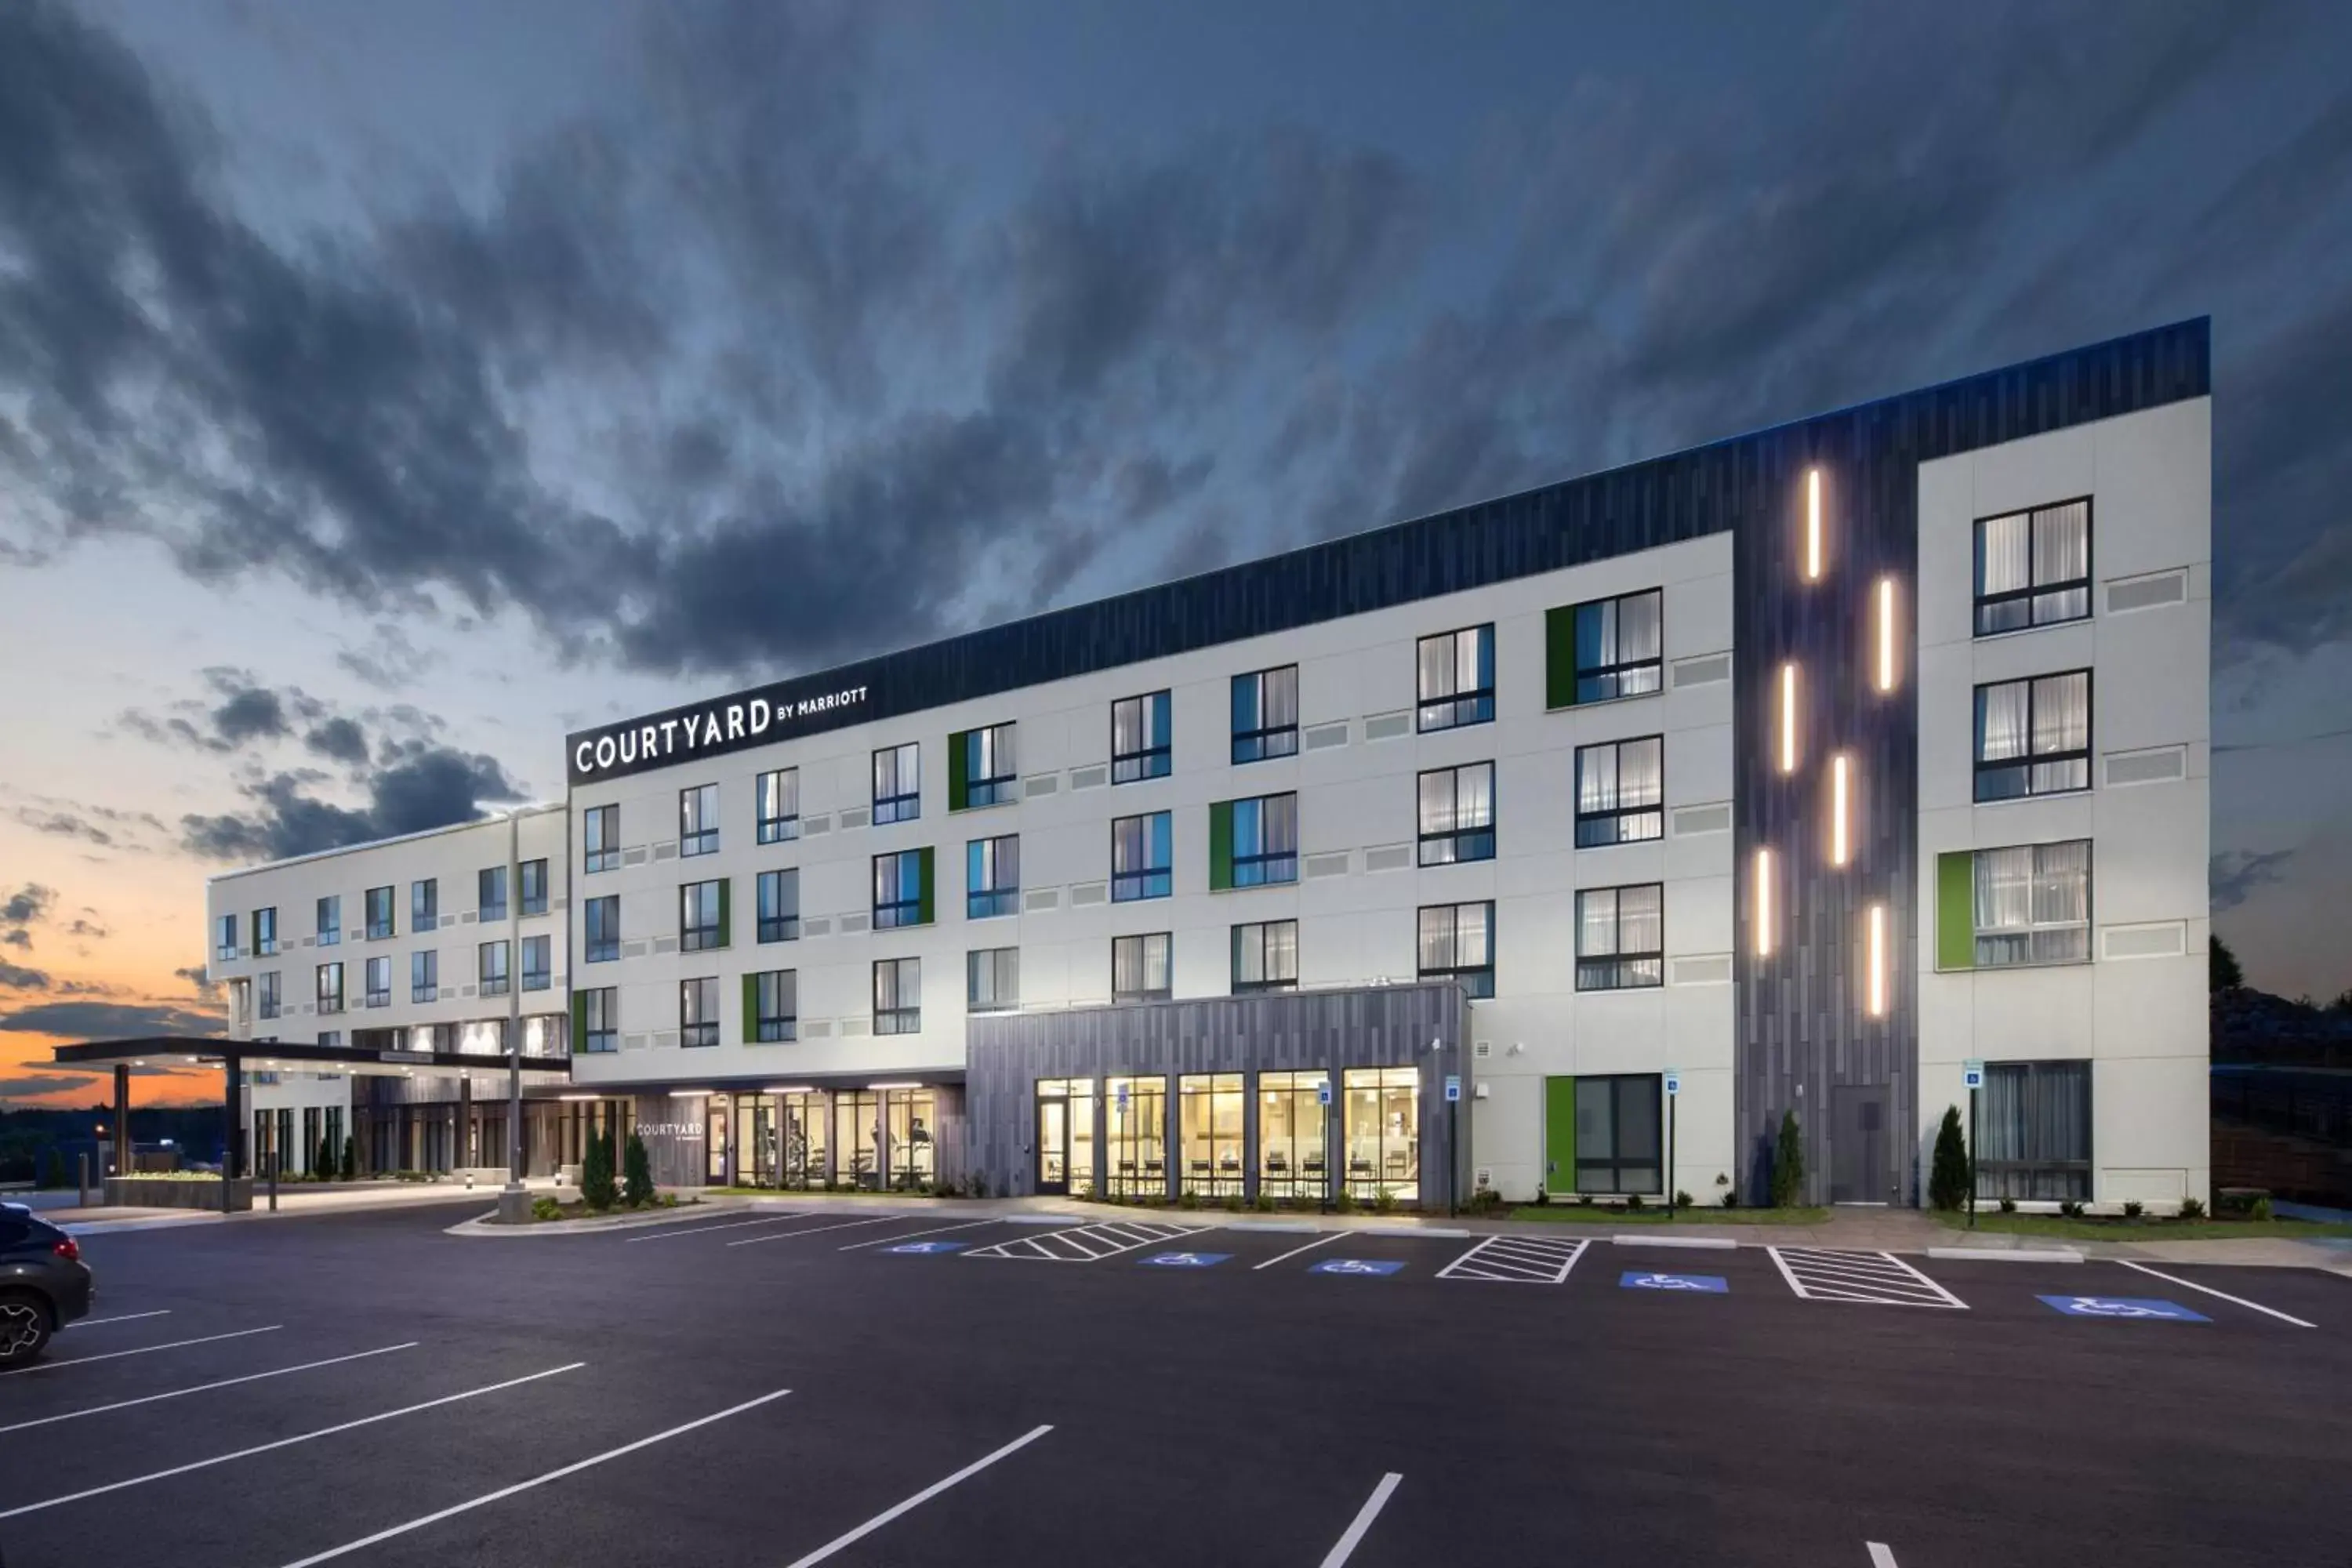 Property Building in Courtyard by Marriott Russellville